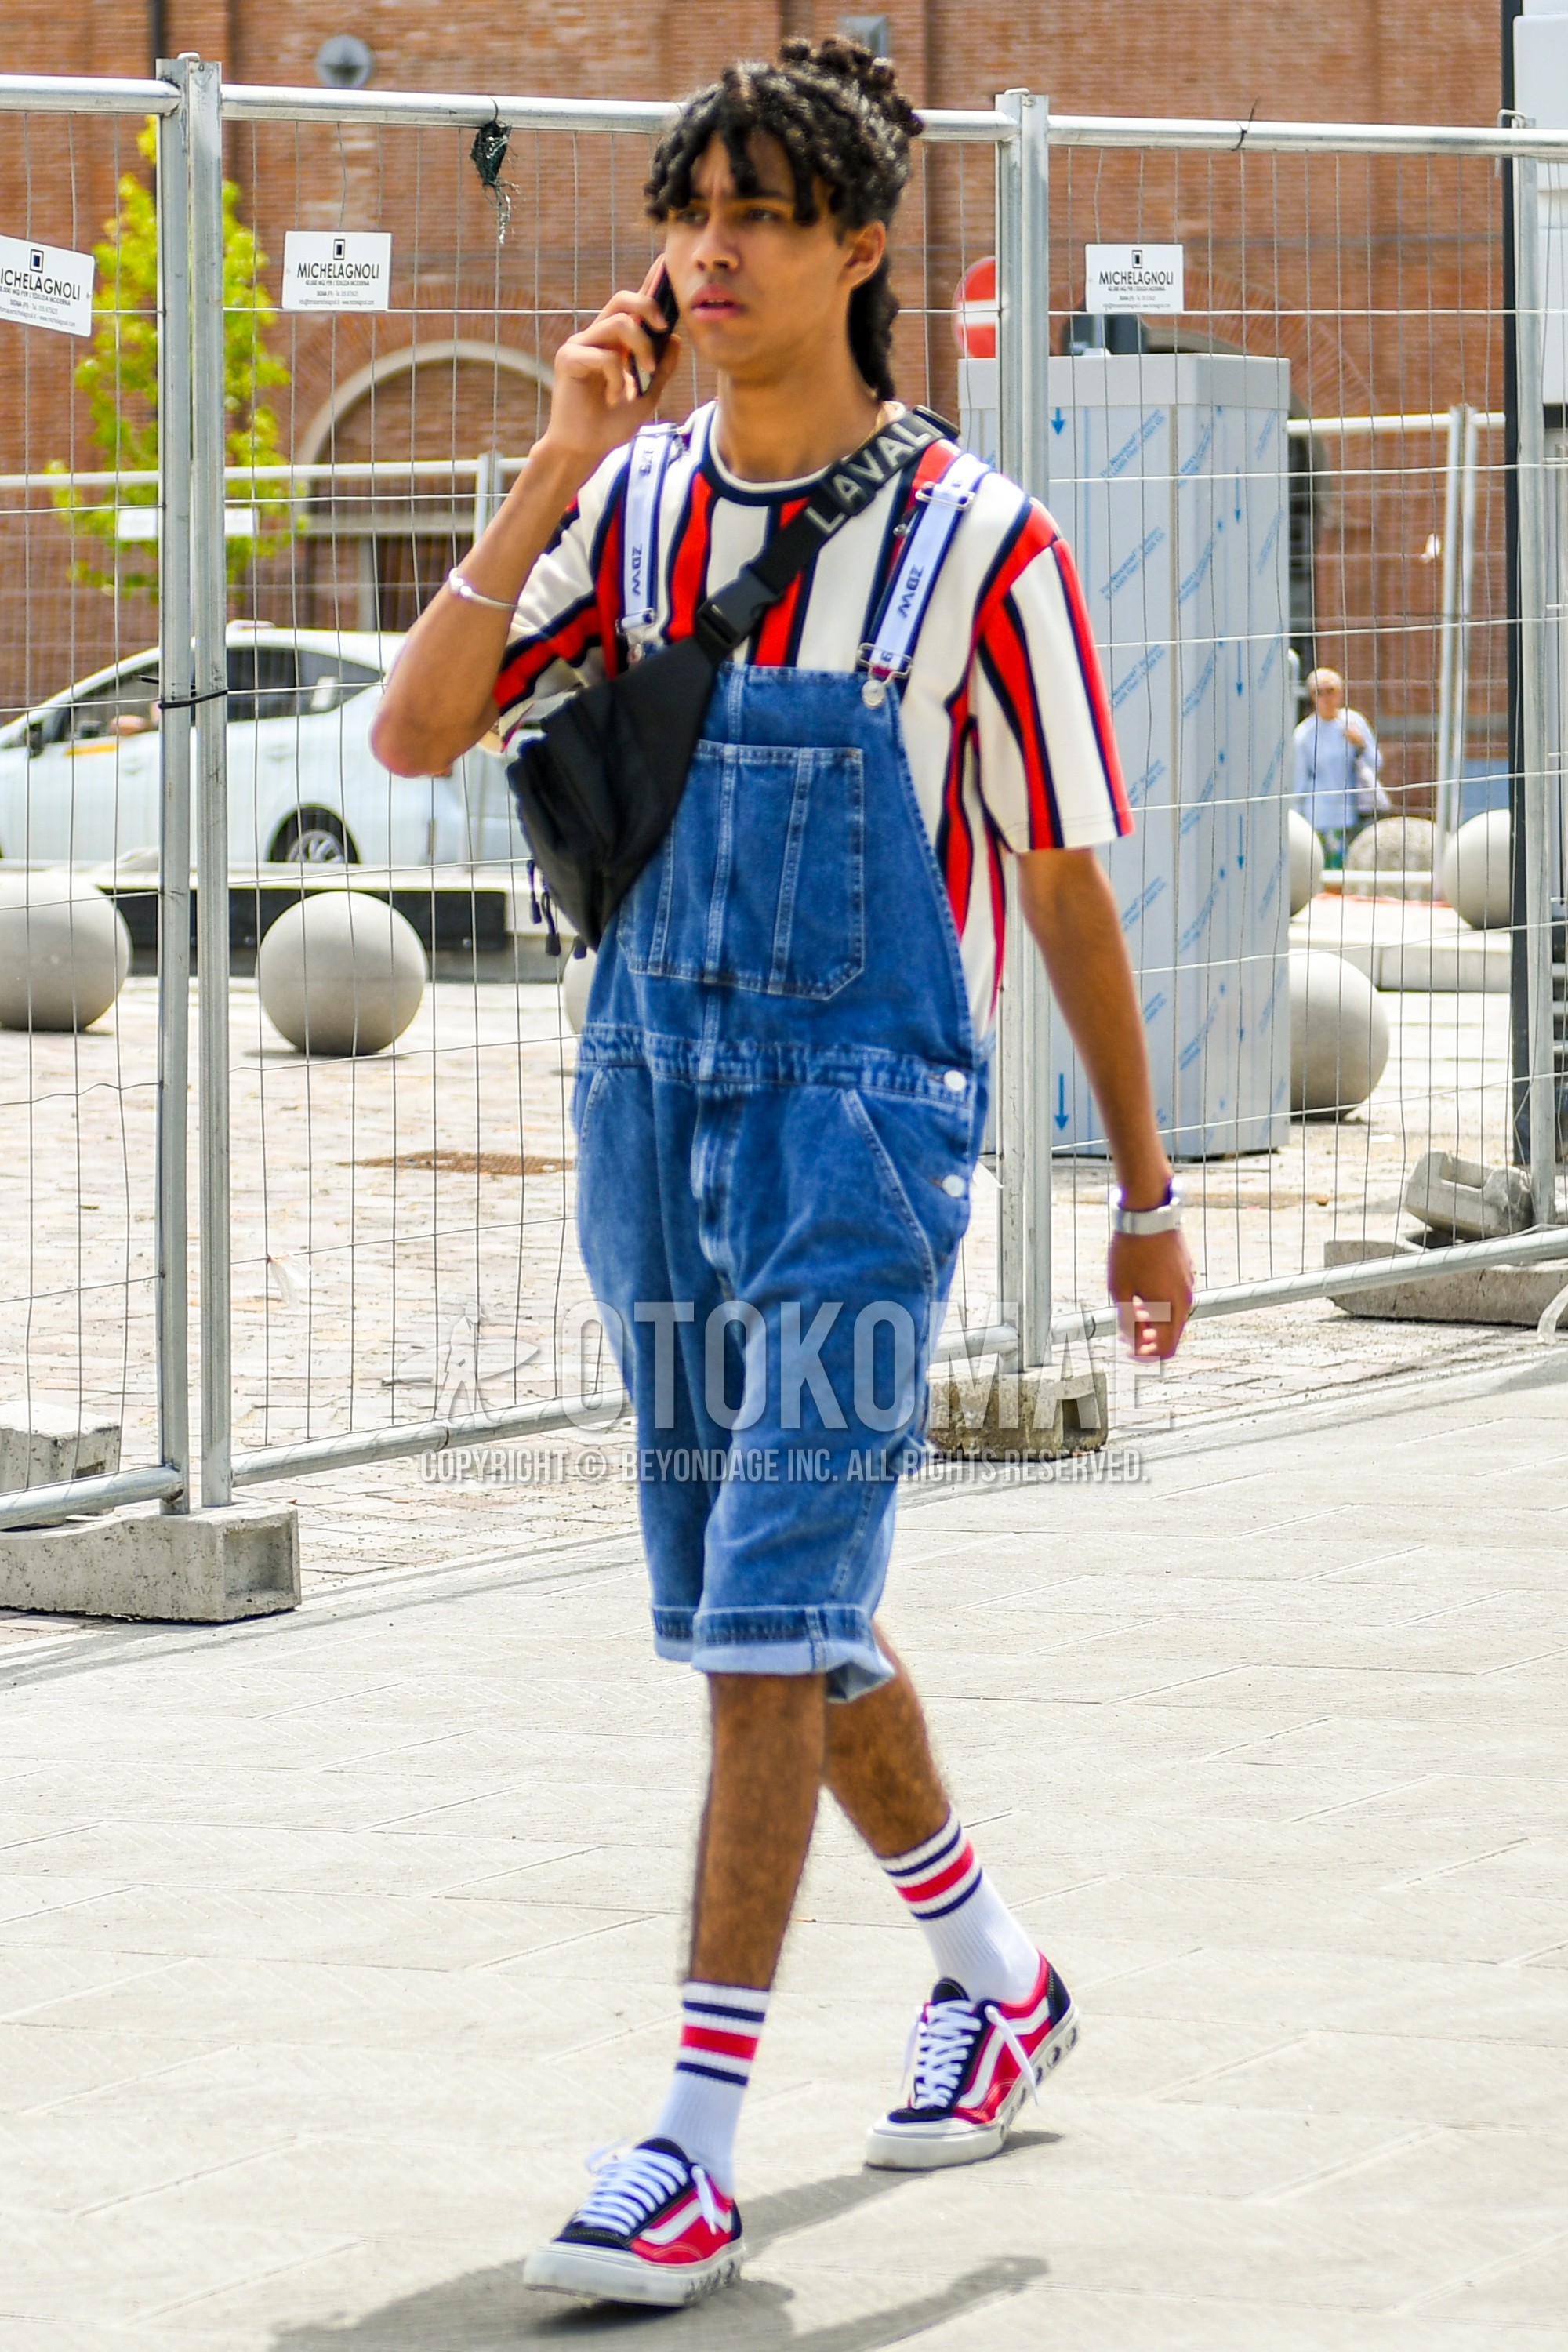 Men's summer outfit with white red stripes t-shirt, white one point suspenders, blue plain denim/jeans, white horizontal stripes socks, pink navy low-cut sneakers, black deca logo body bag.